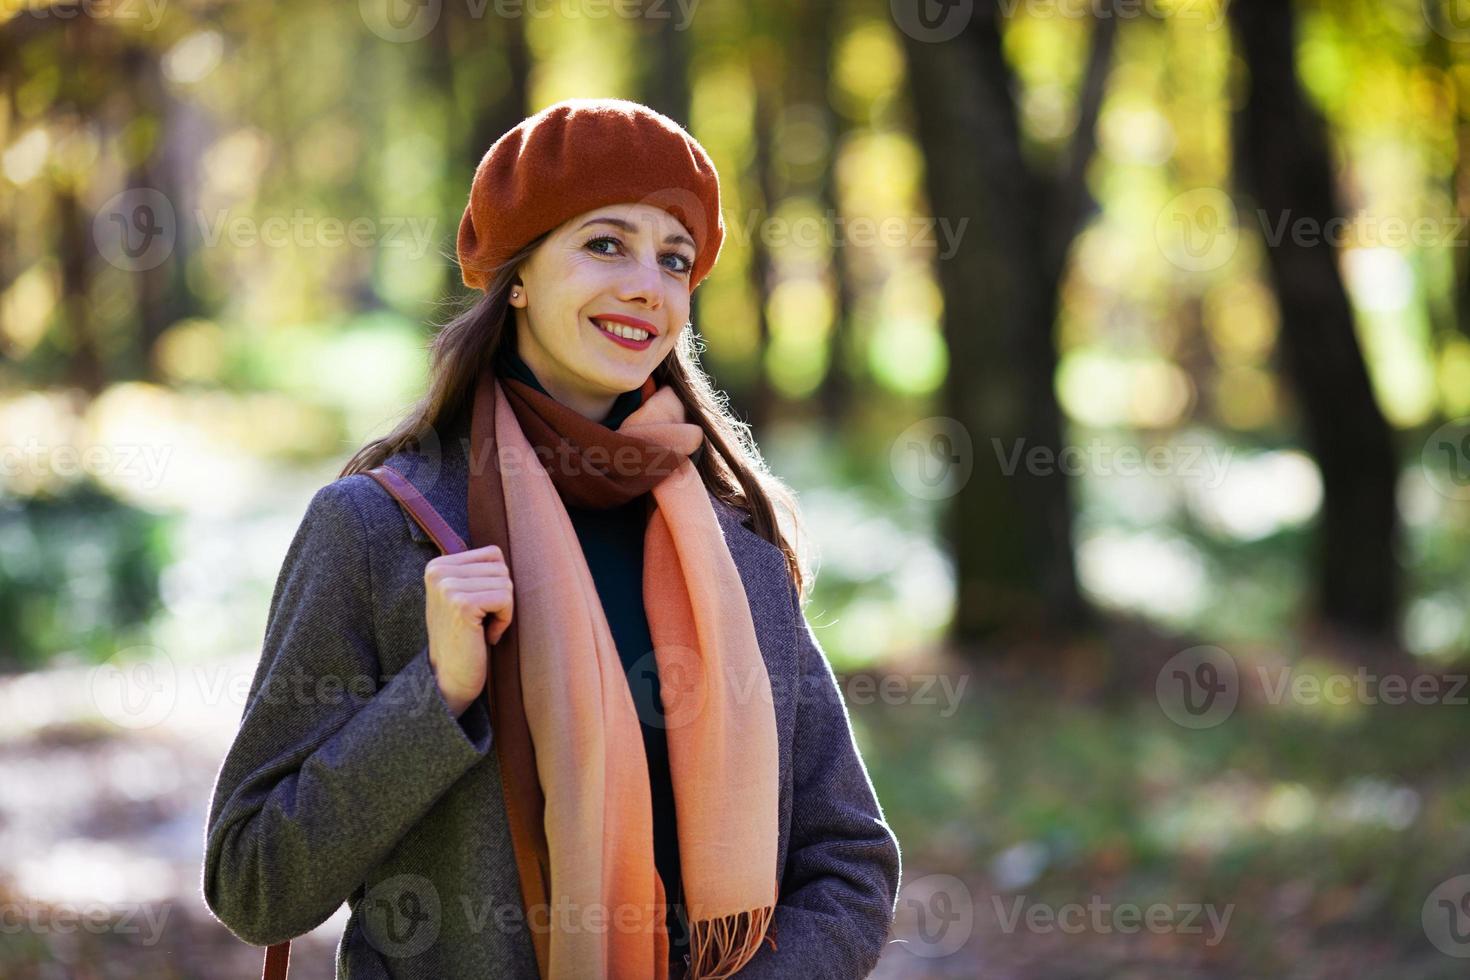 Young woman in an orange beret walks in an autumn park photo